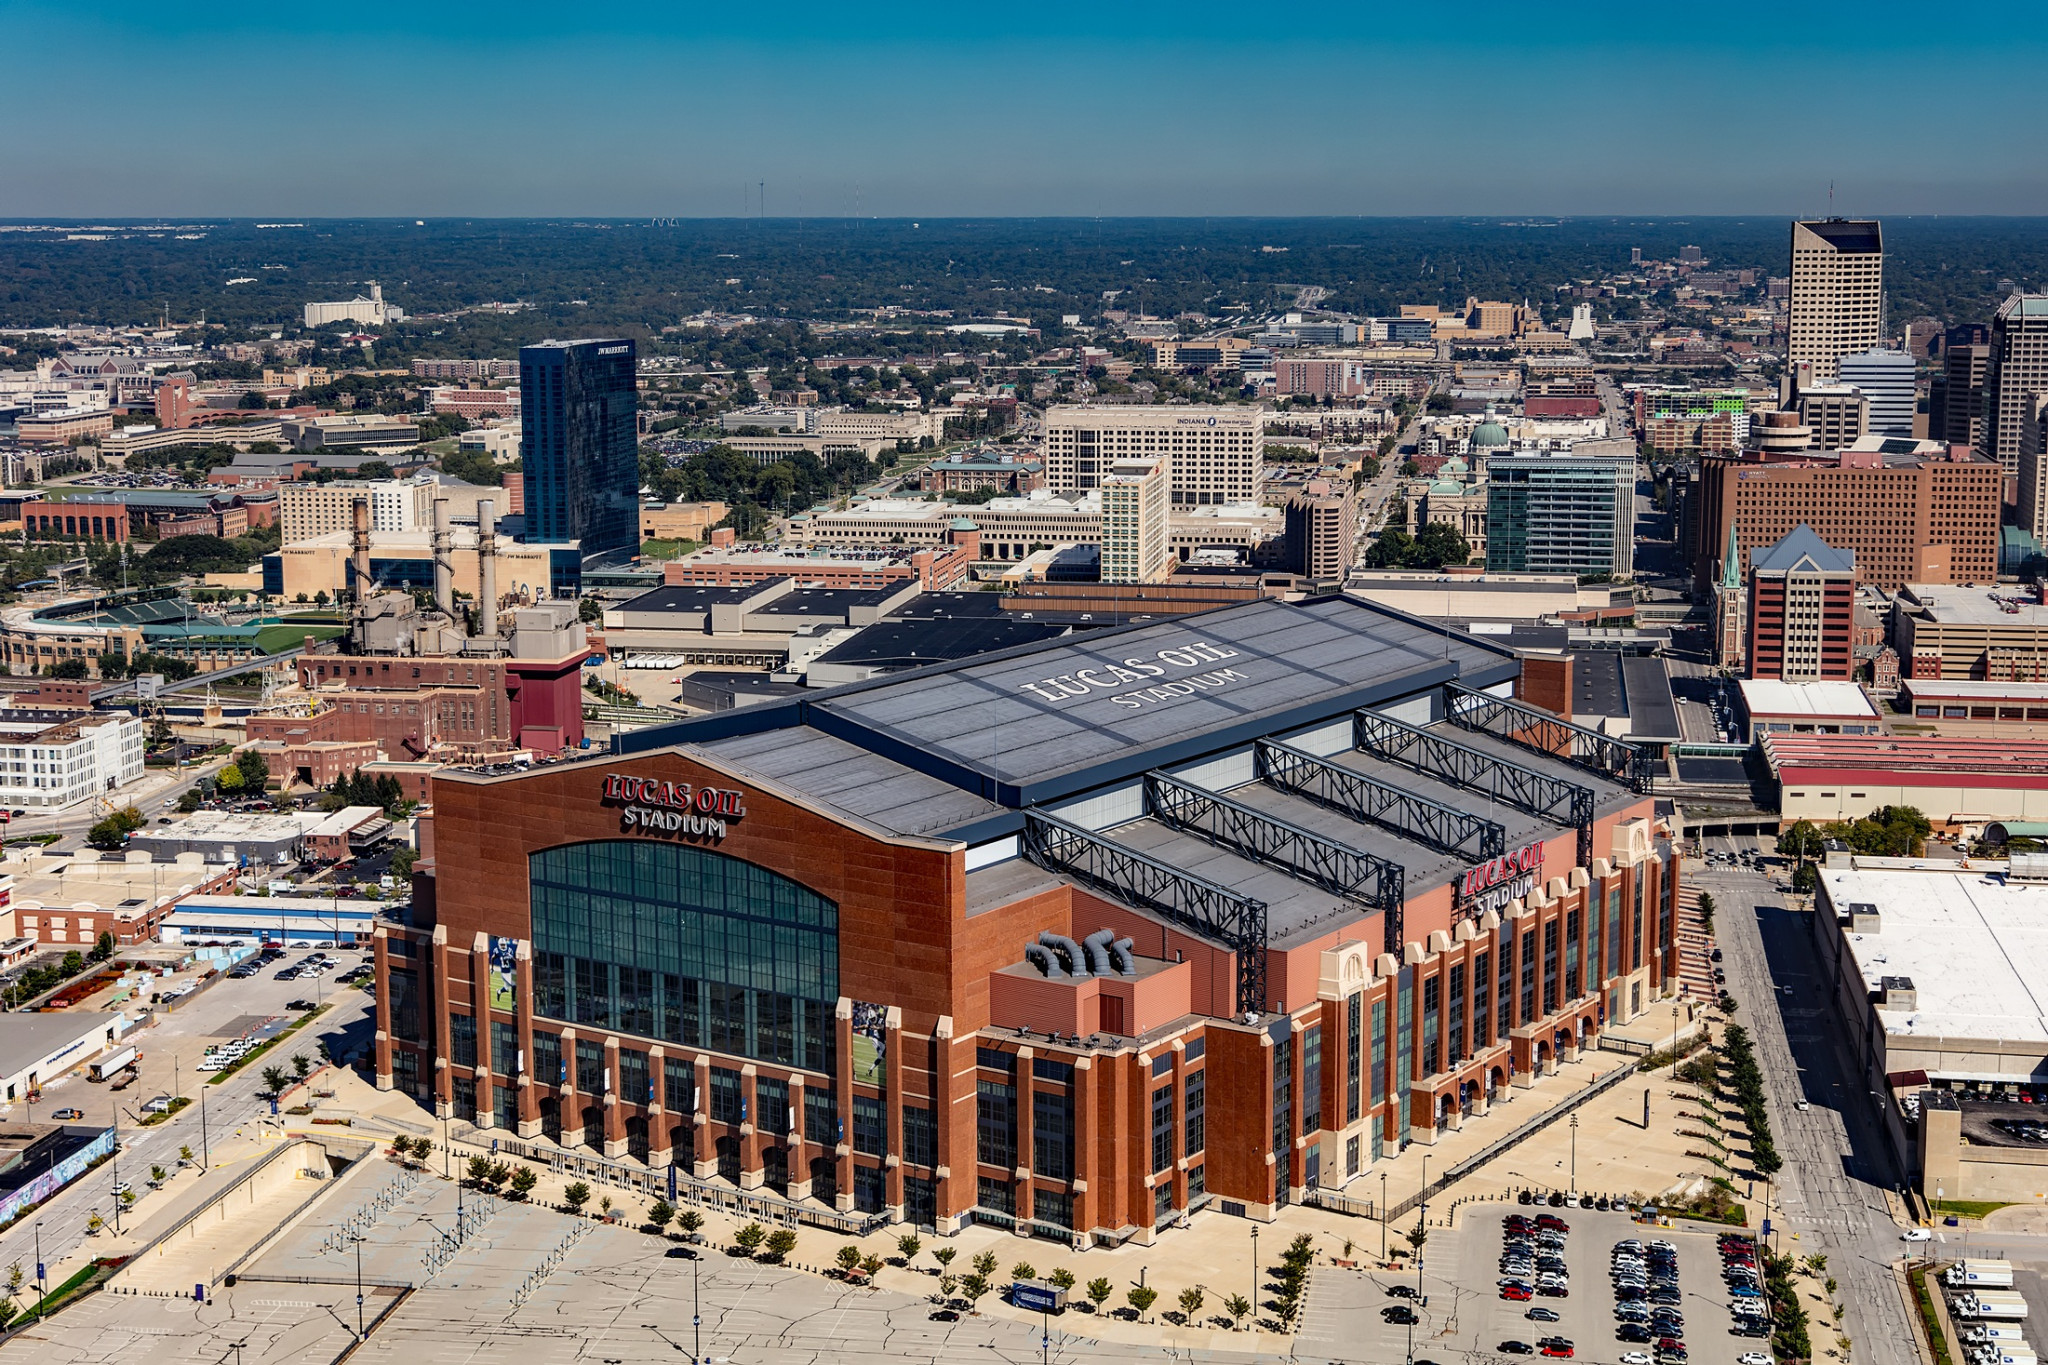 Next year's NCAA Final Four tournament is set to take place at Lucas Oil Stadium in Indianapolis ©Wikipedia